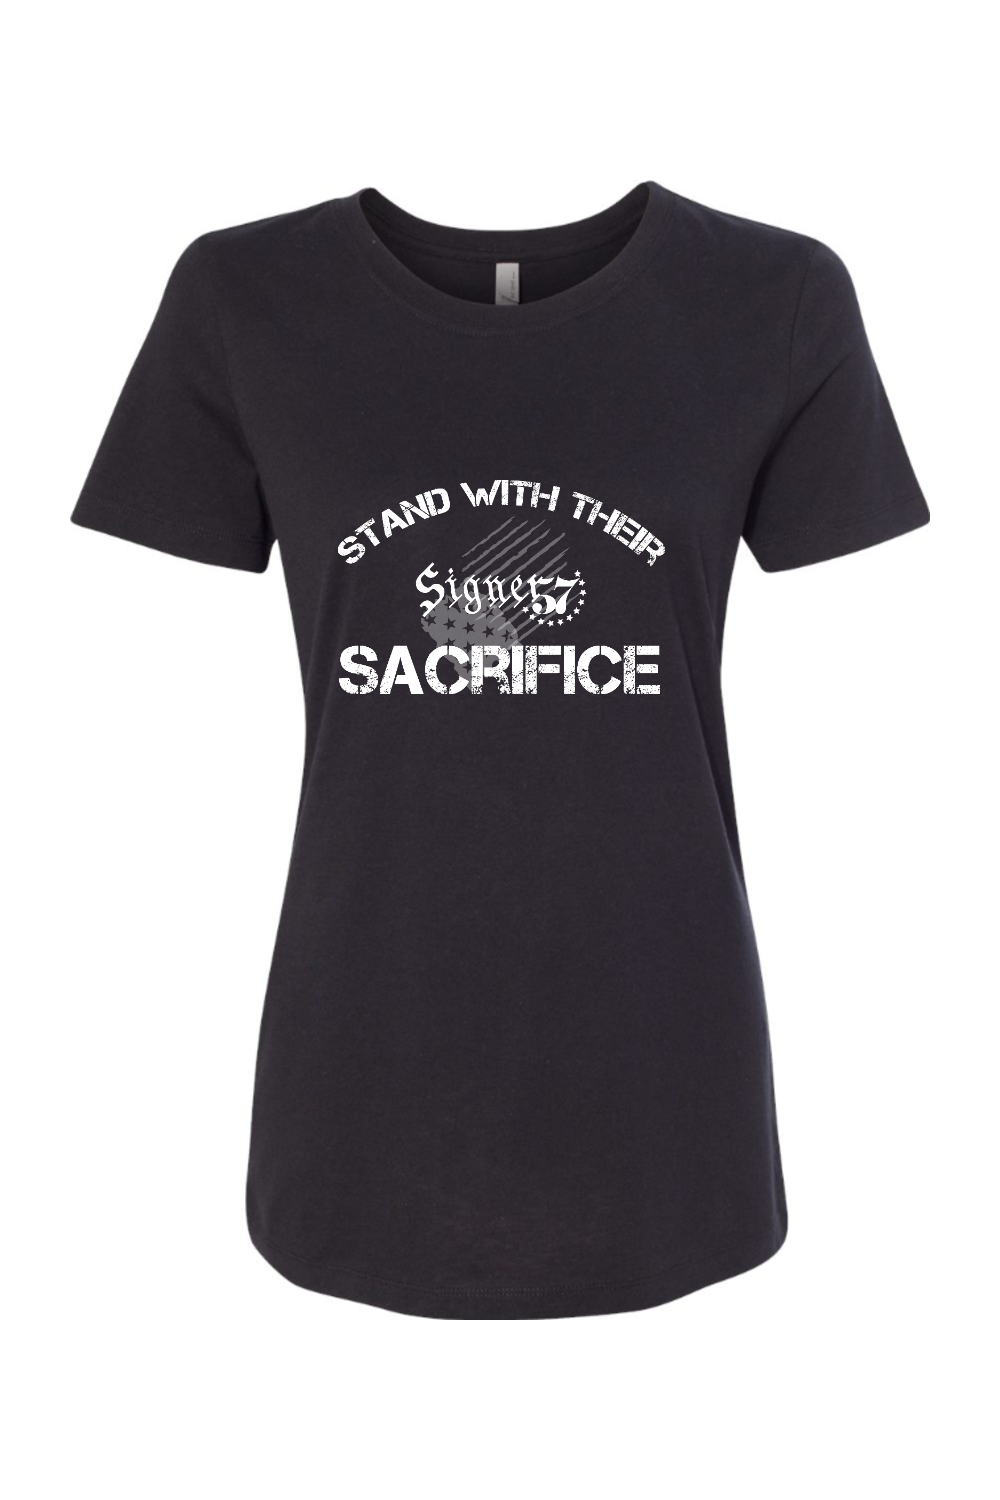 Women's T-Shirt - Stand With Their Sacrifice